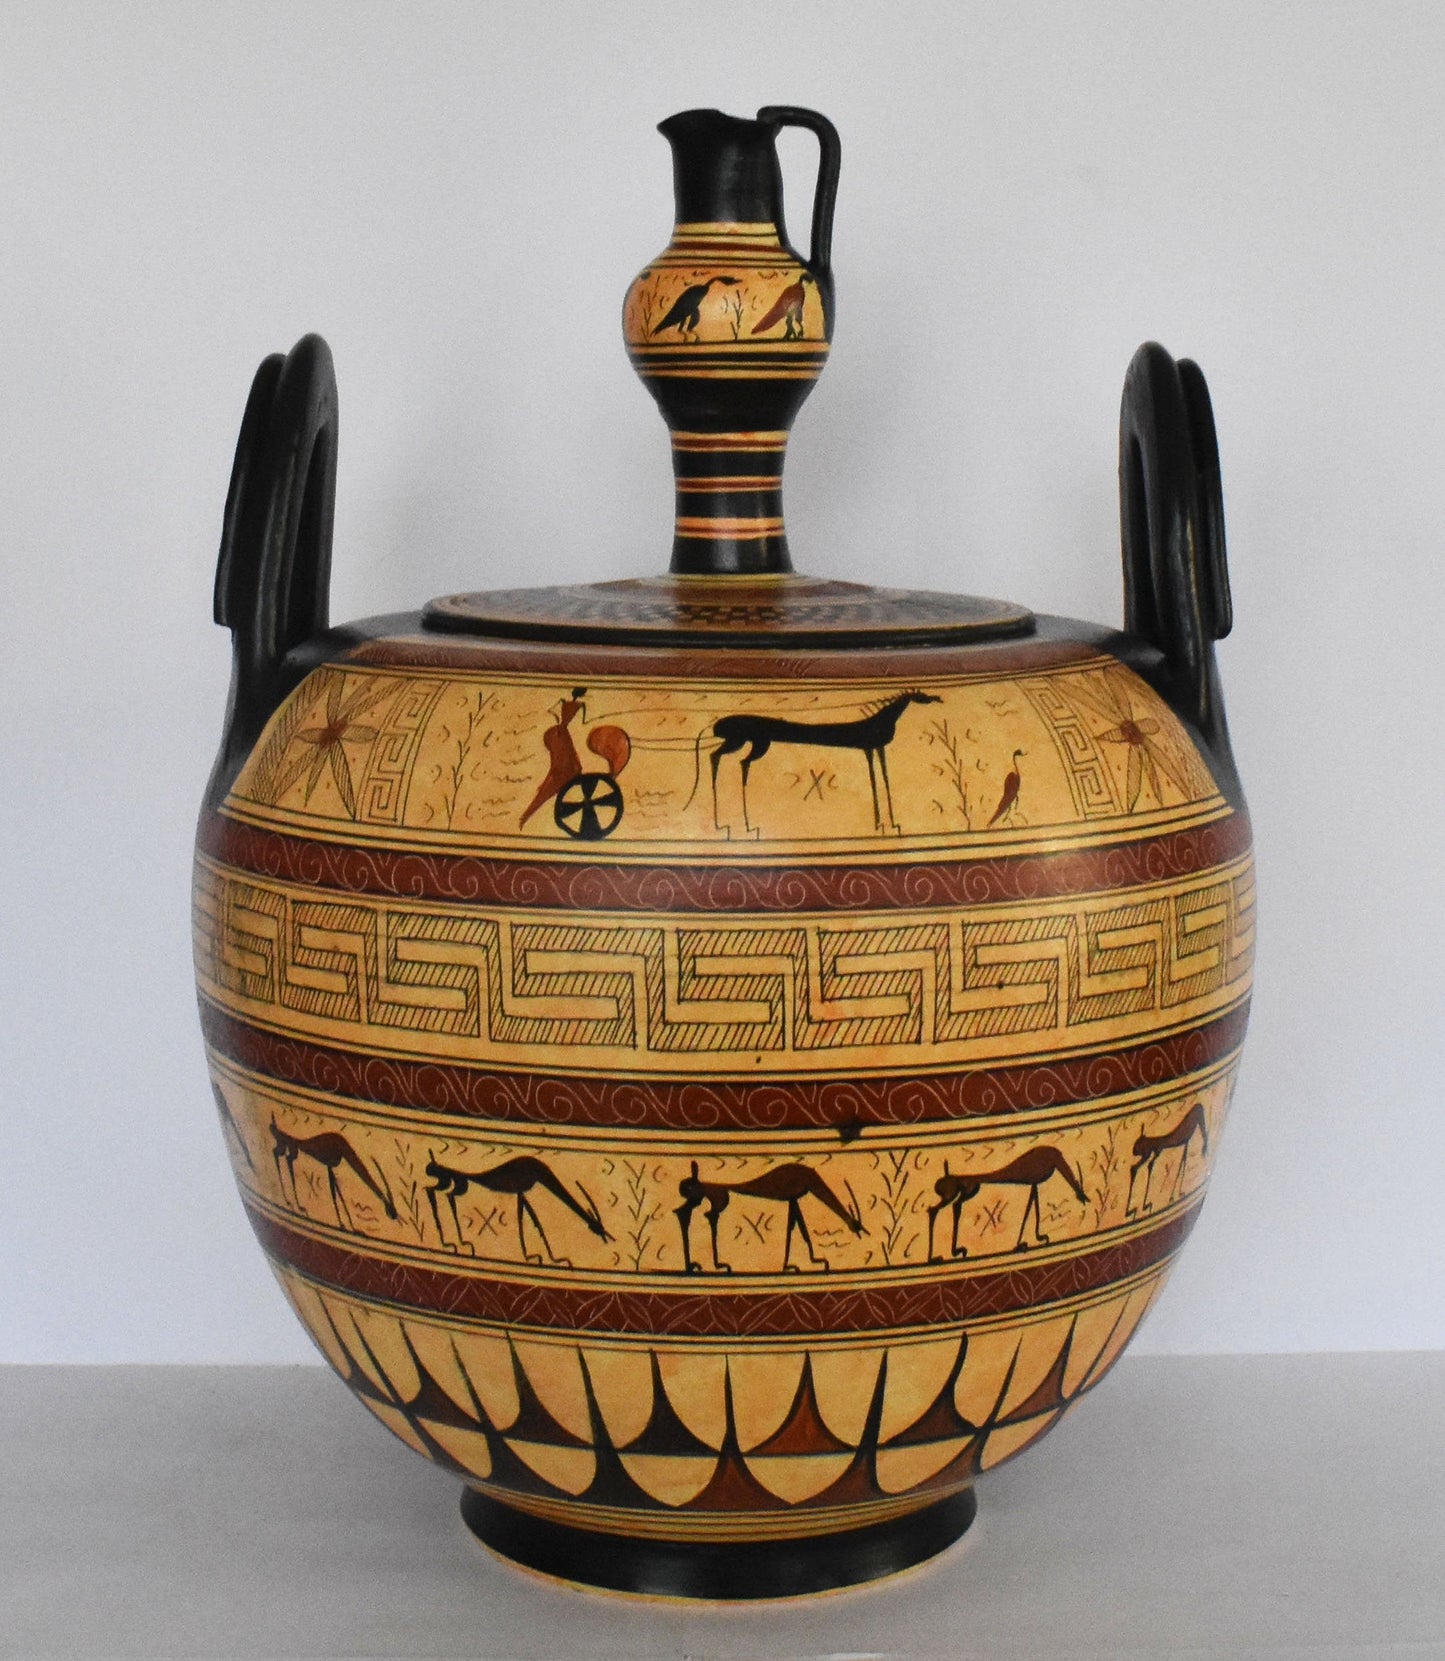 Geometric period Vessel - Man on a Chariot, Animals, Meander and Rosette Motives - Ceramic Vase